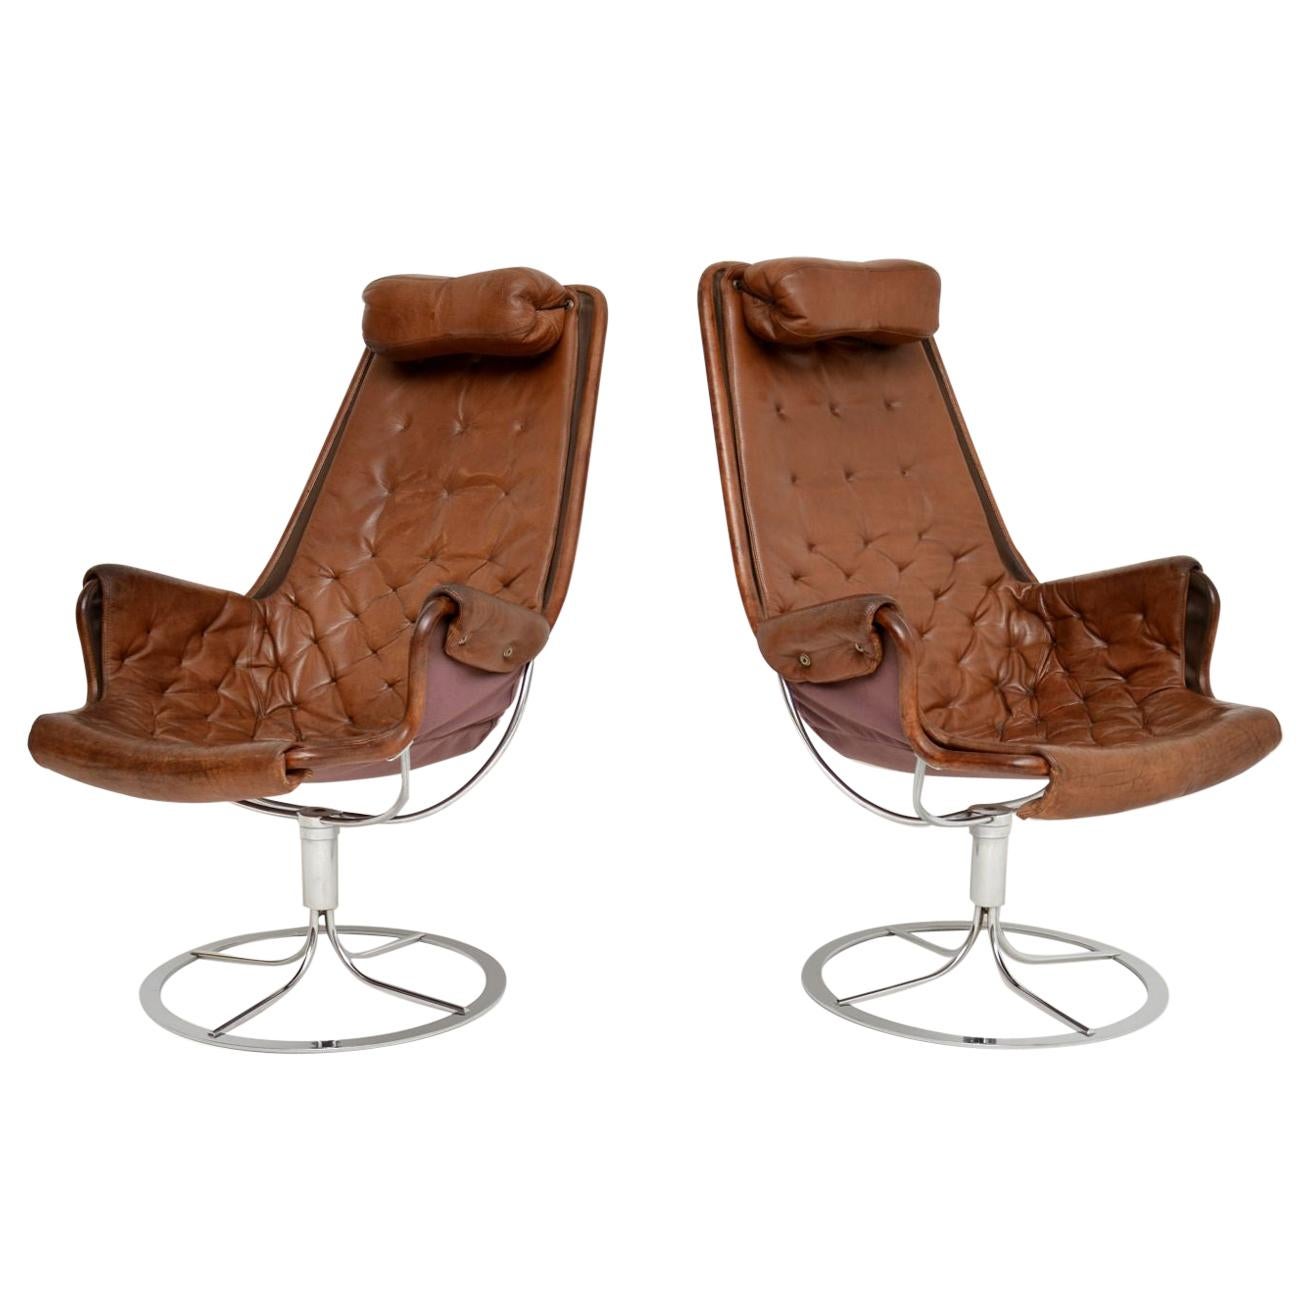 Pair of Vintage Leather Swivel ‘Jetson’ Armchairs by Bruno Mathsson